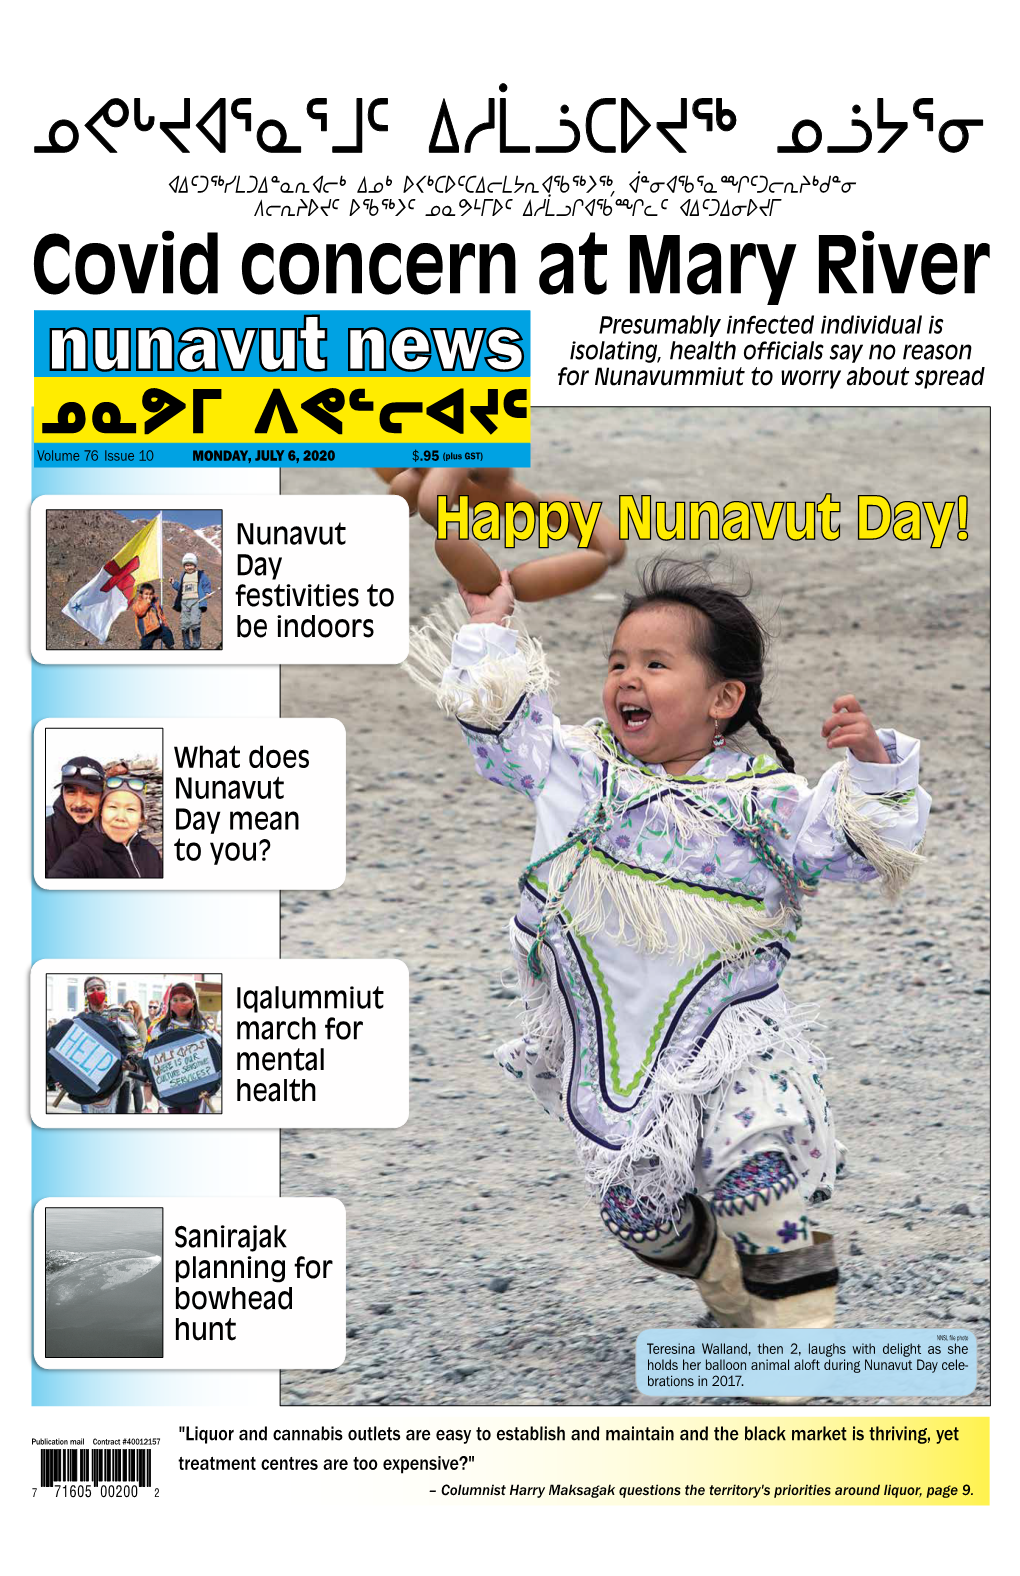 Covid Concern at Mary River Presumably Infected Individual Is Isolating, Health Officials Say No Reason for Nunavummiut to Worry About Spread